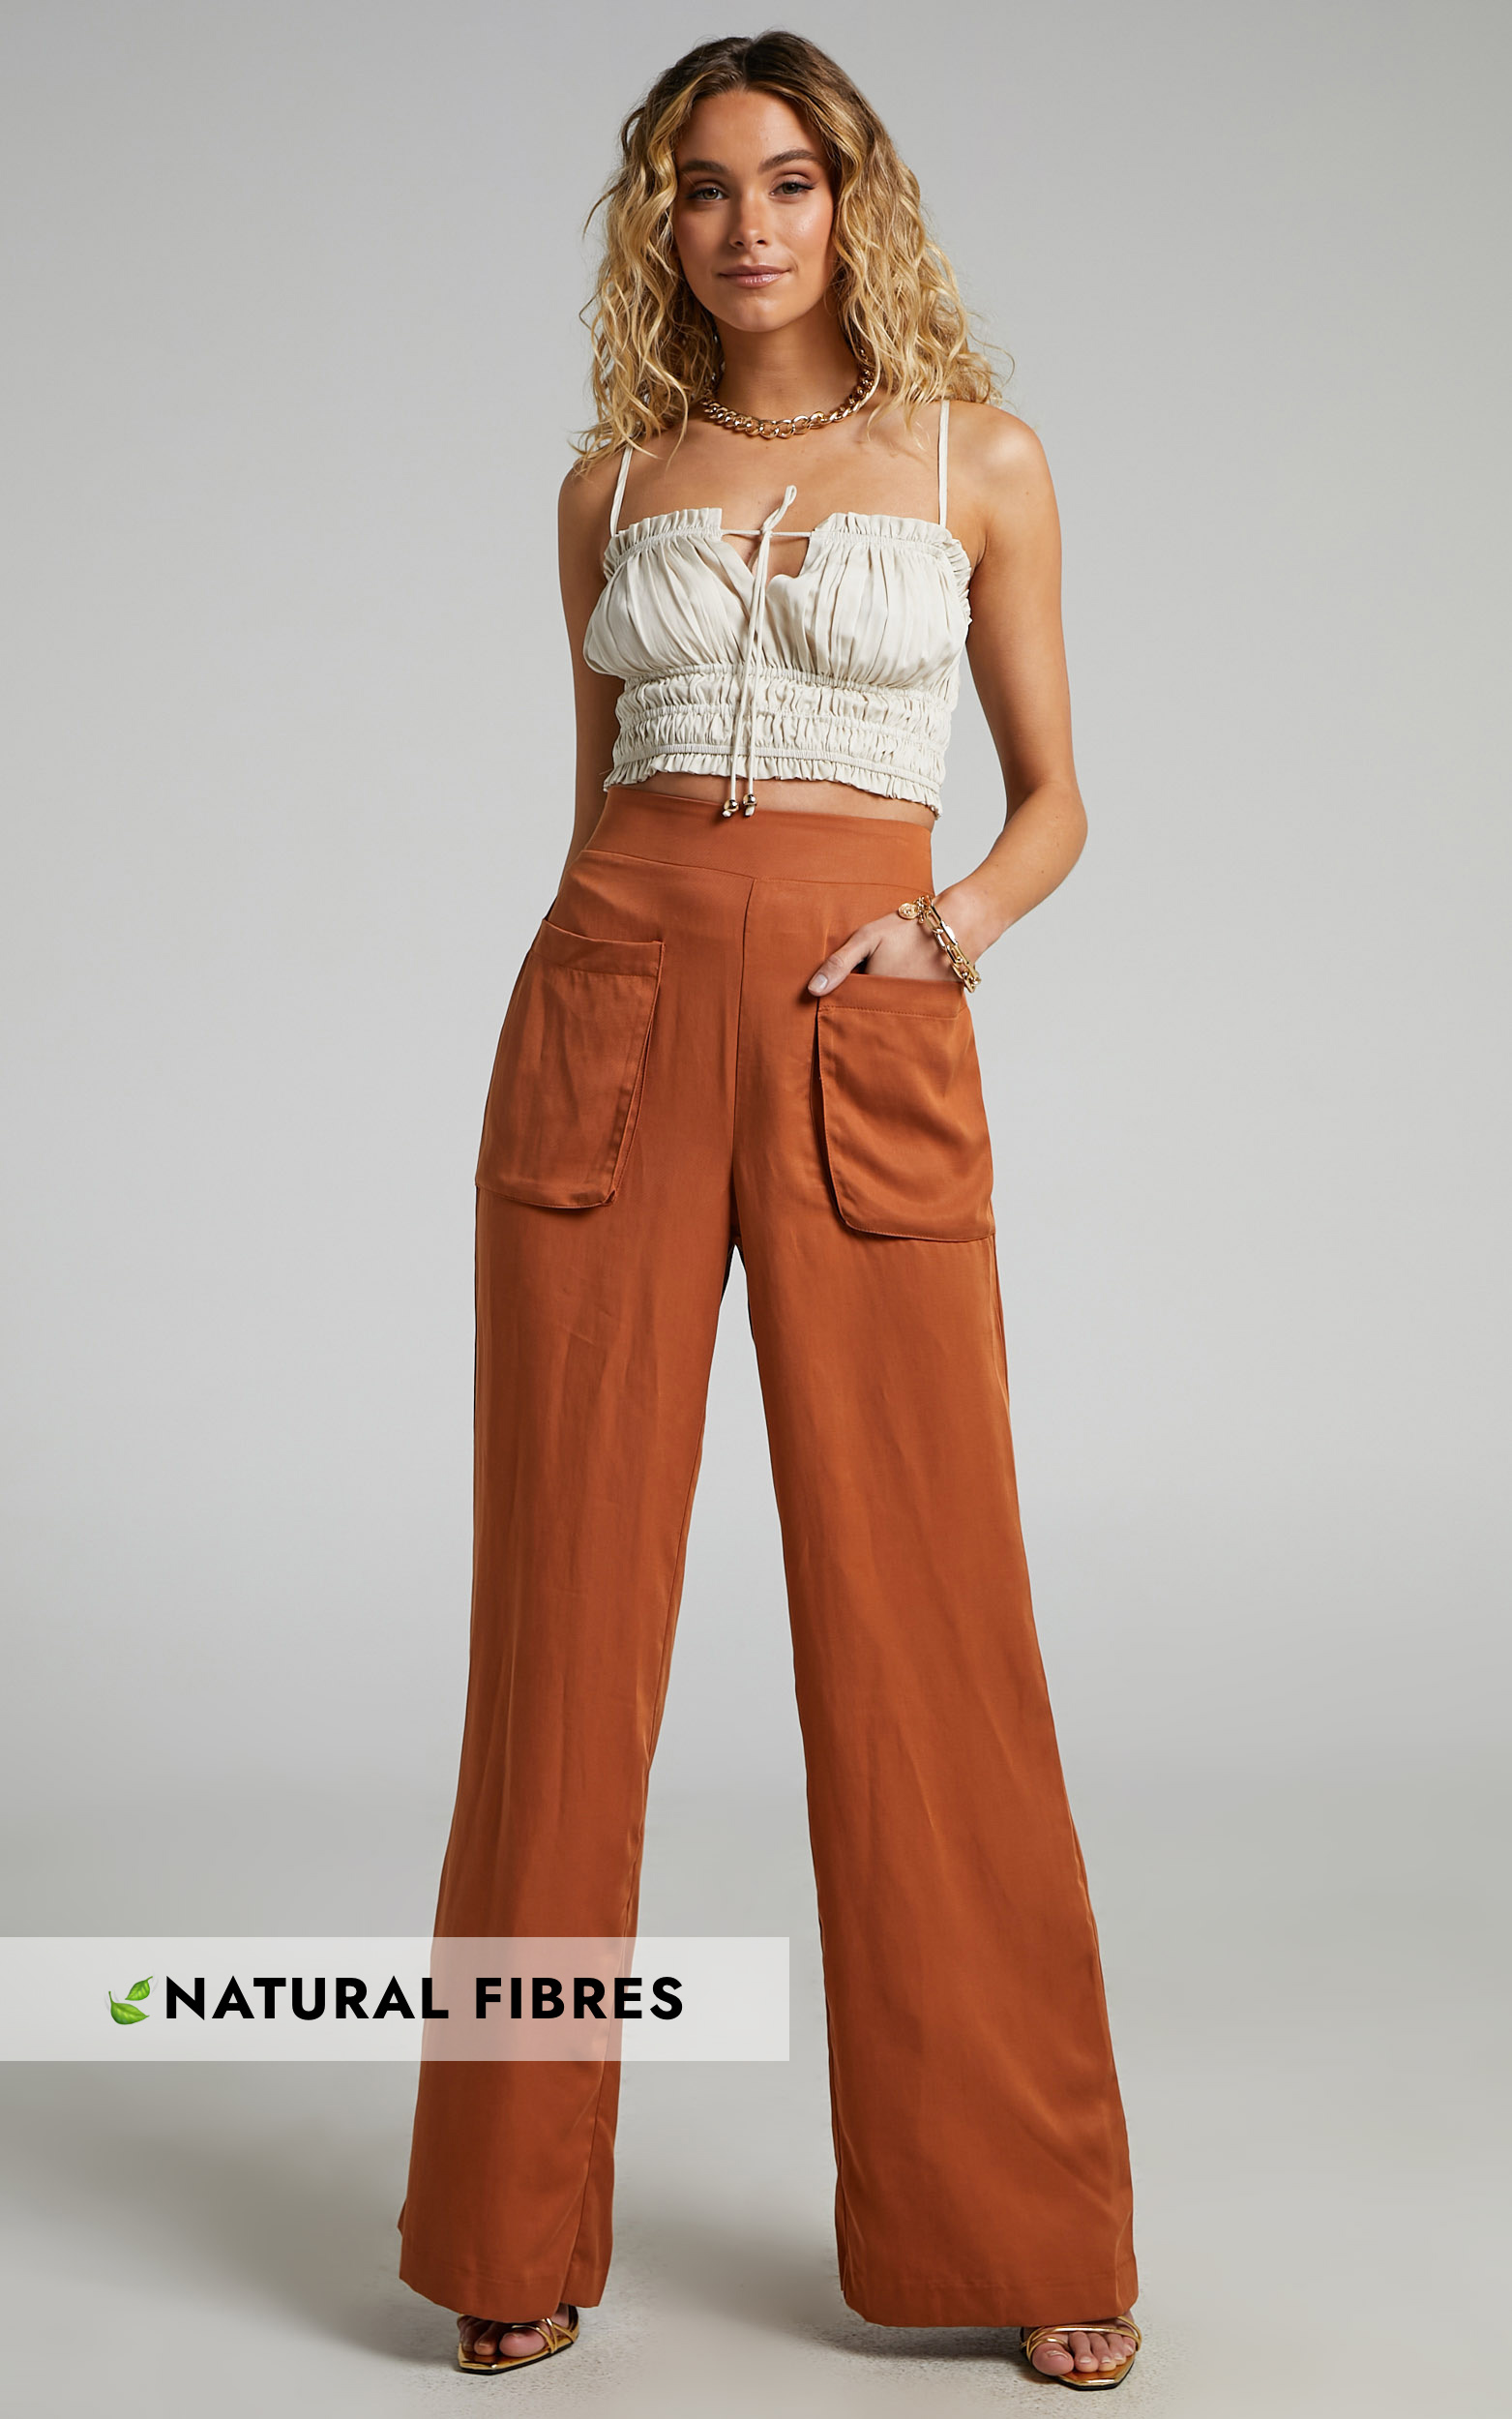 Amalie The Label - Ambroise High Waisted Wide Leg Pants in Earth - 04, BRN1, hi-res image number null